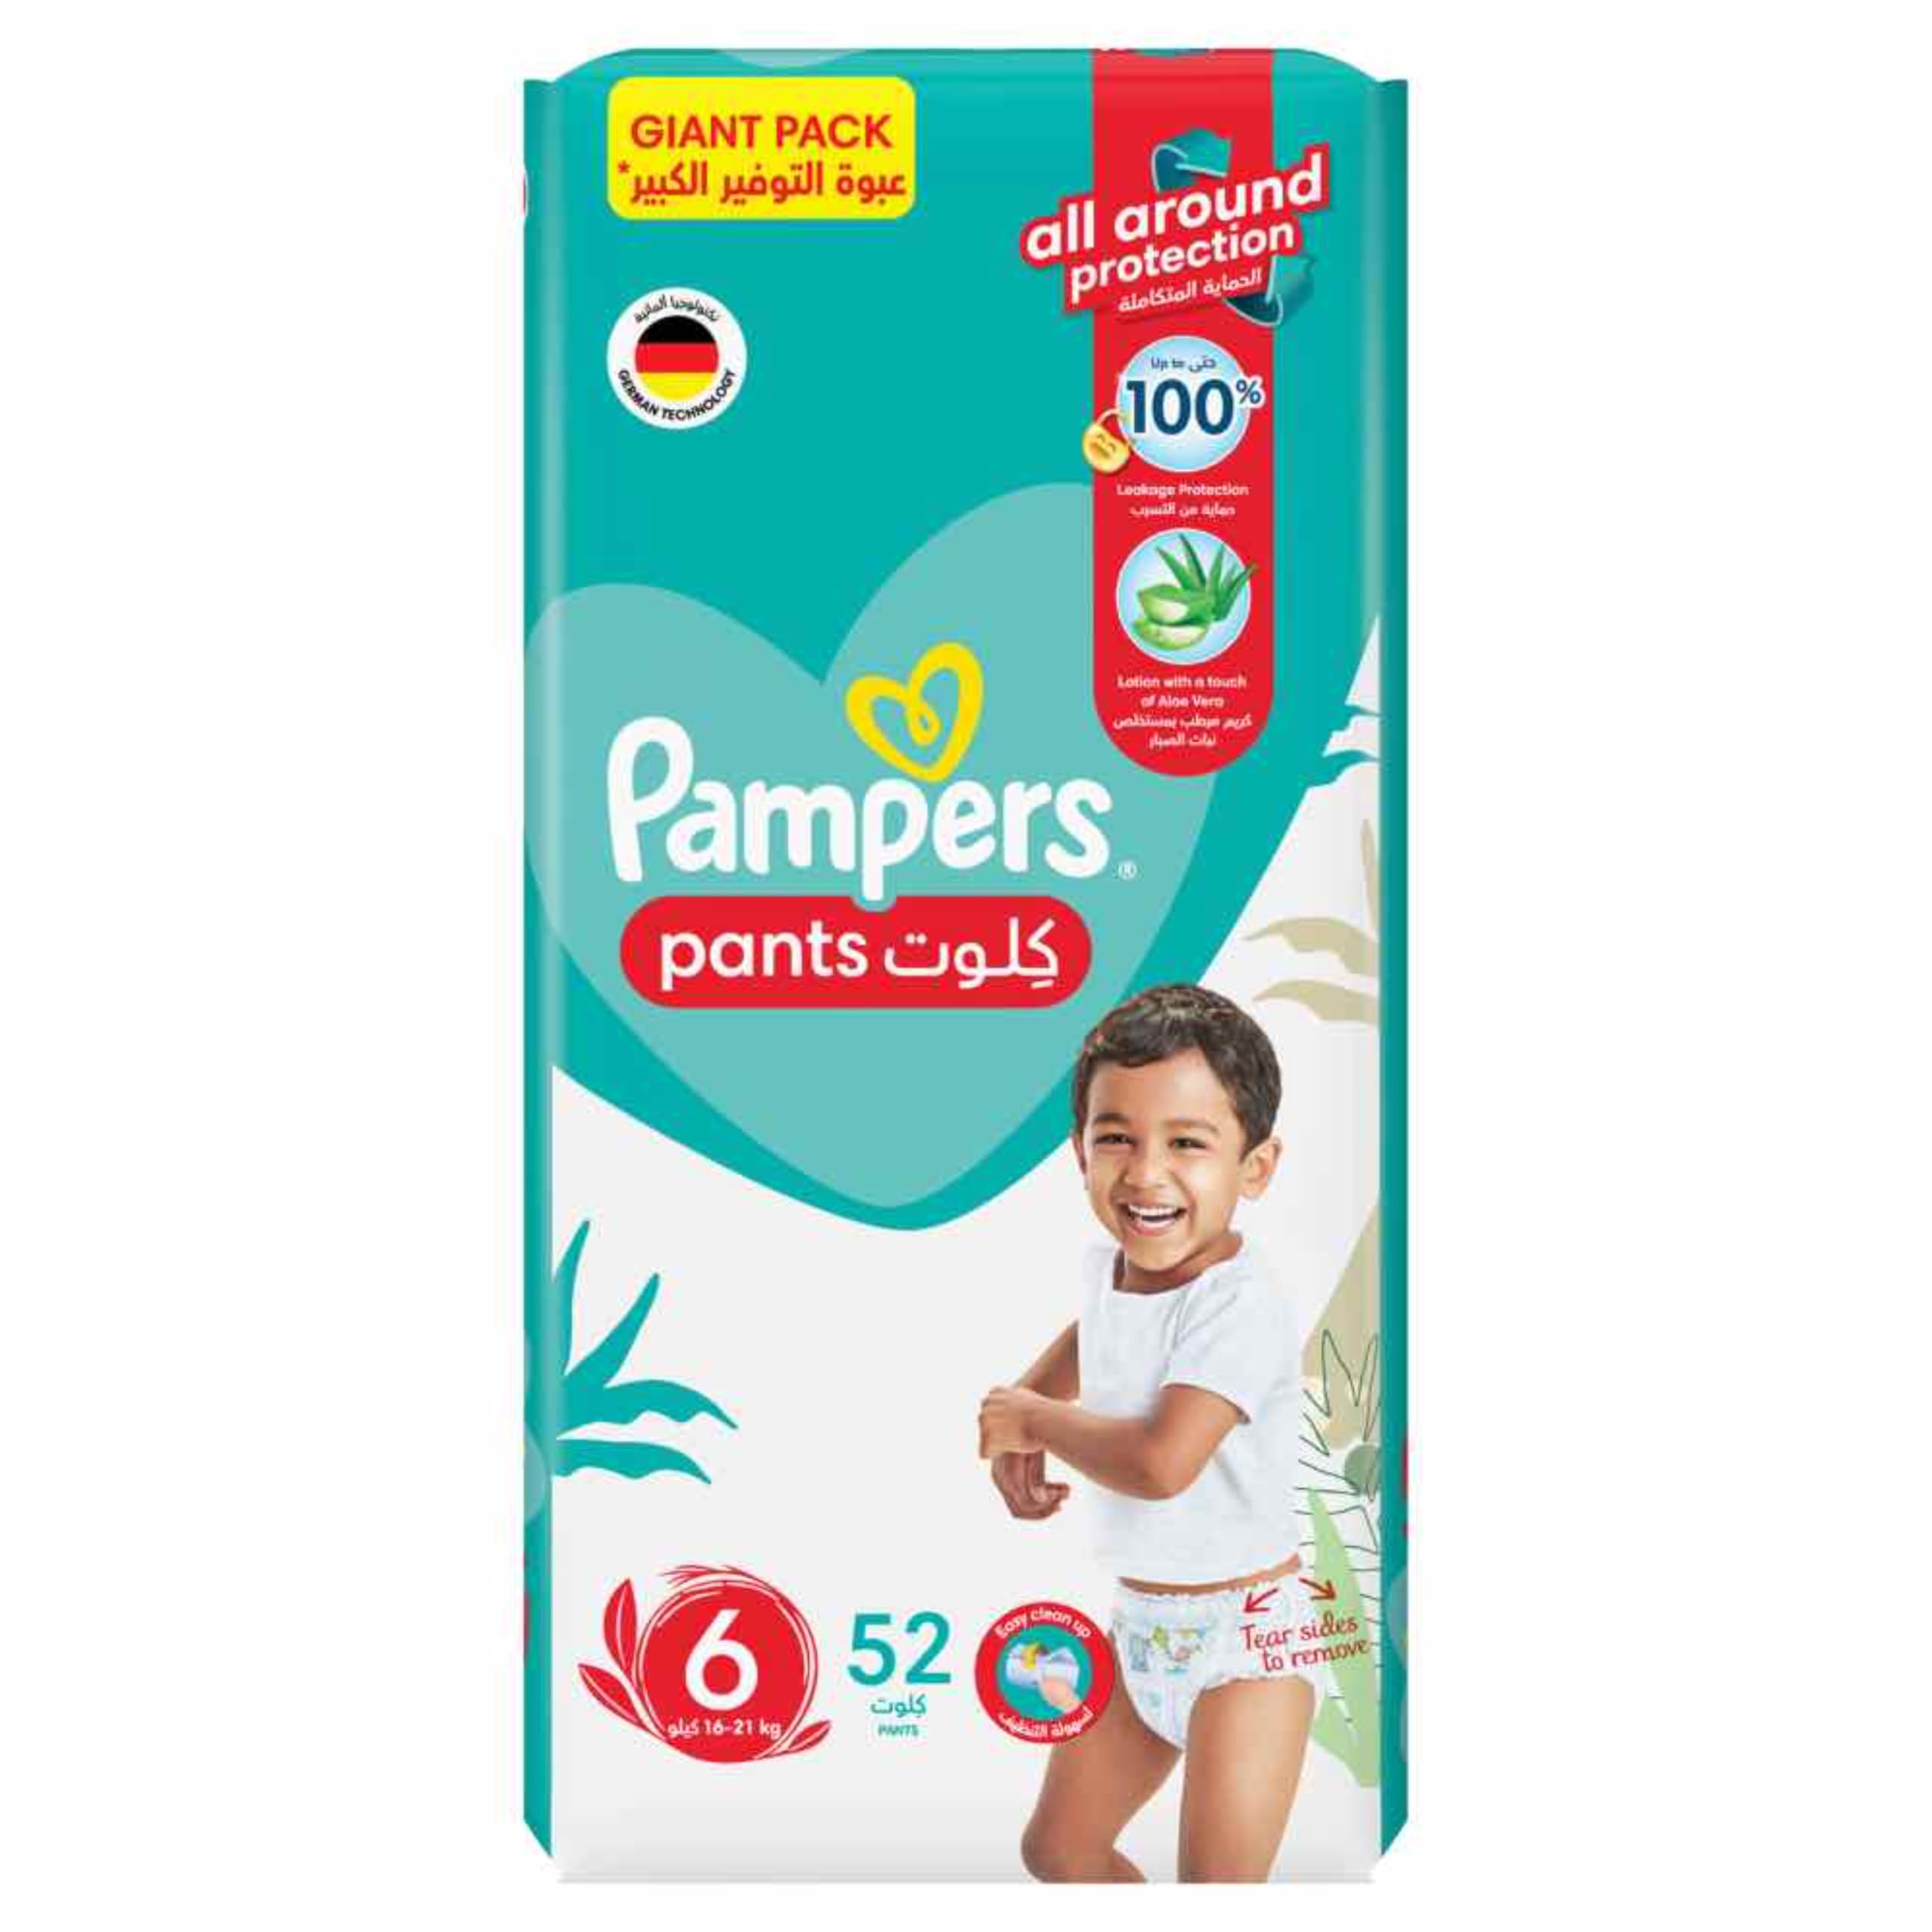 Pampers Baby-Dry Pants Diapers with Aloe Vera Lotion, 360 Fit & up to 100% Leakproof, Size 6, 16+kg, Giant Pack, 52 Count